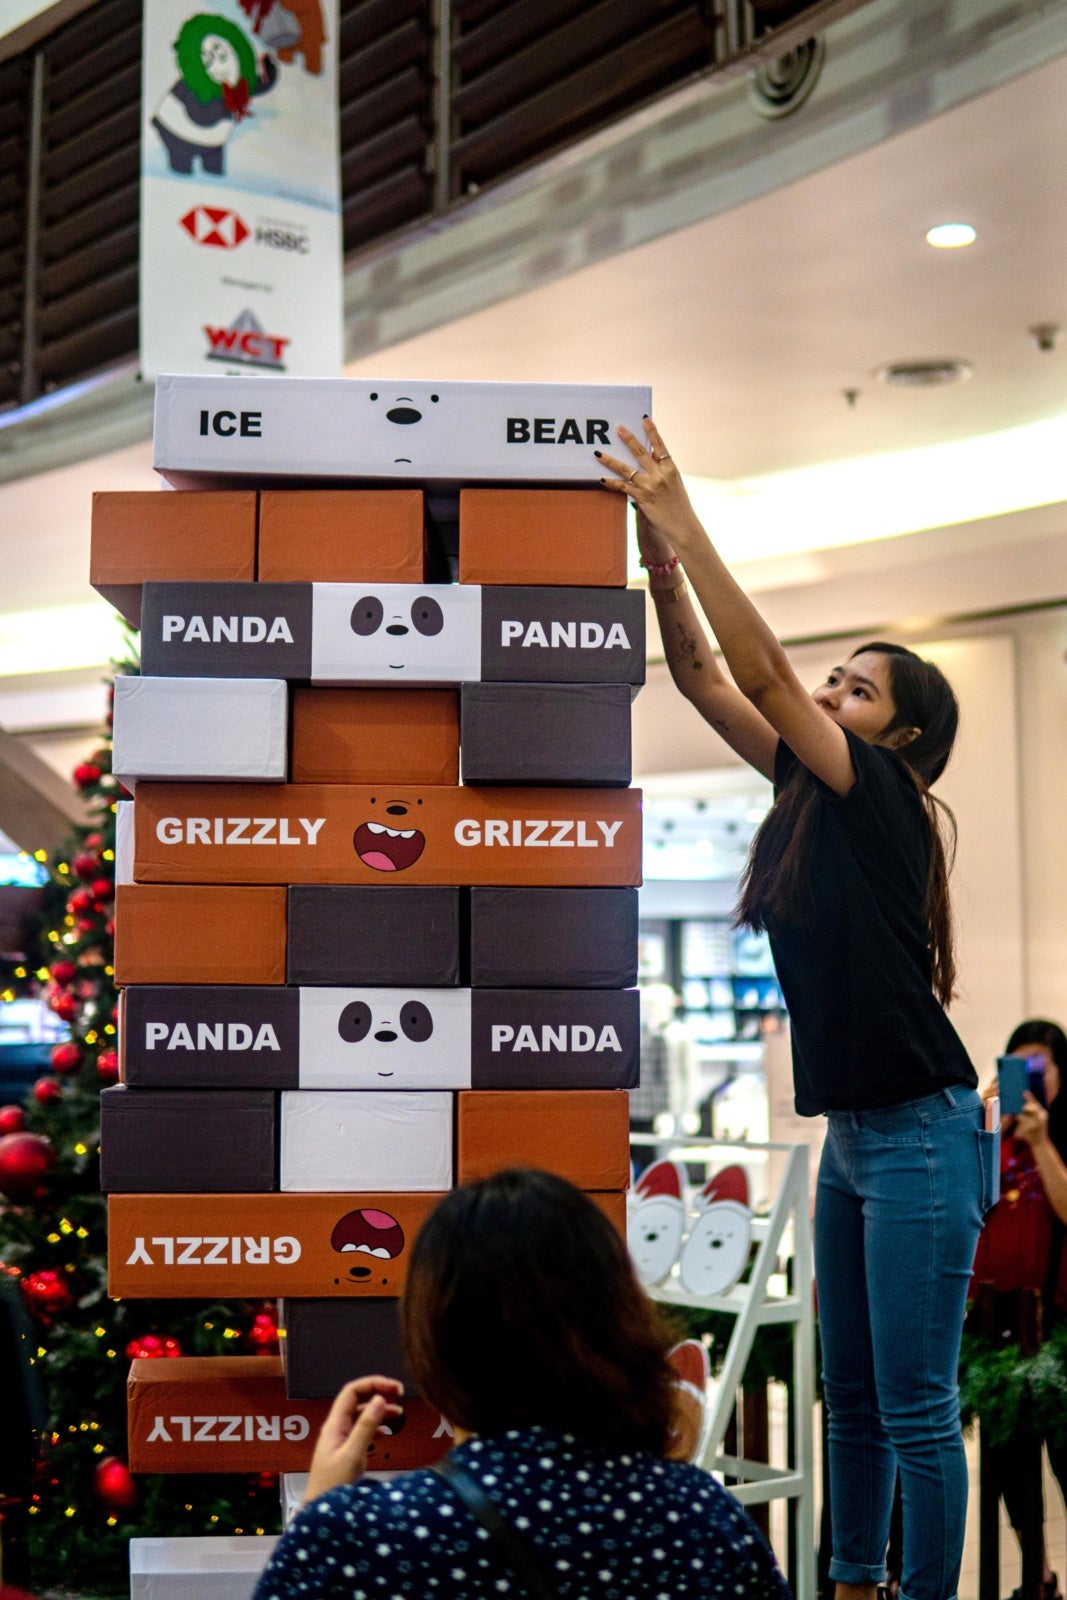 [TEST] A 'We Bare Bears' Themed Christmas in Malaysia That's Breaking a Nationwide Record?! Here's What We Know! - WORLD OF BUZZ 15